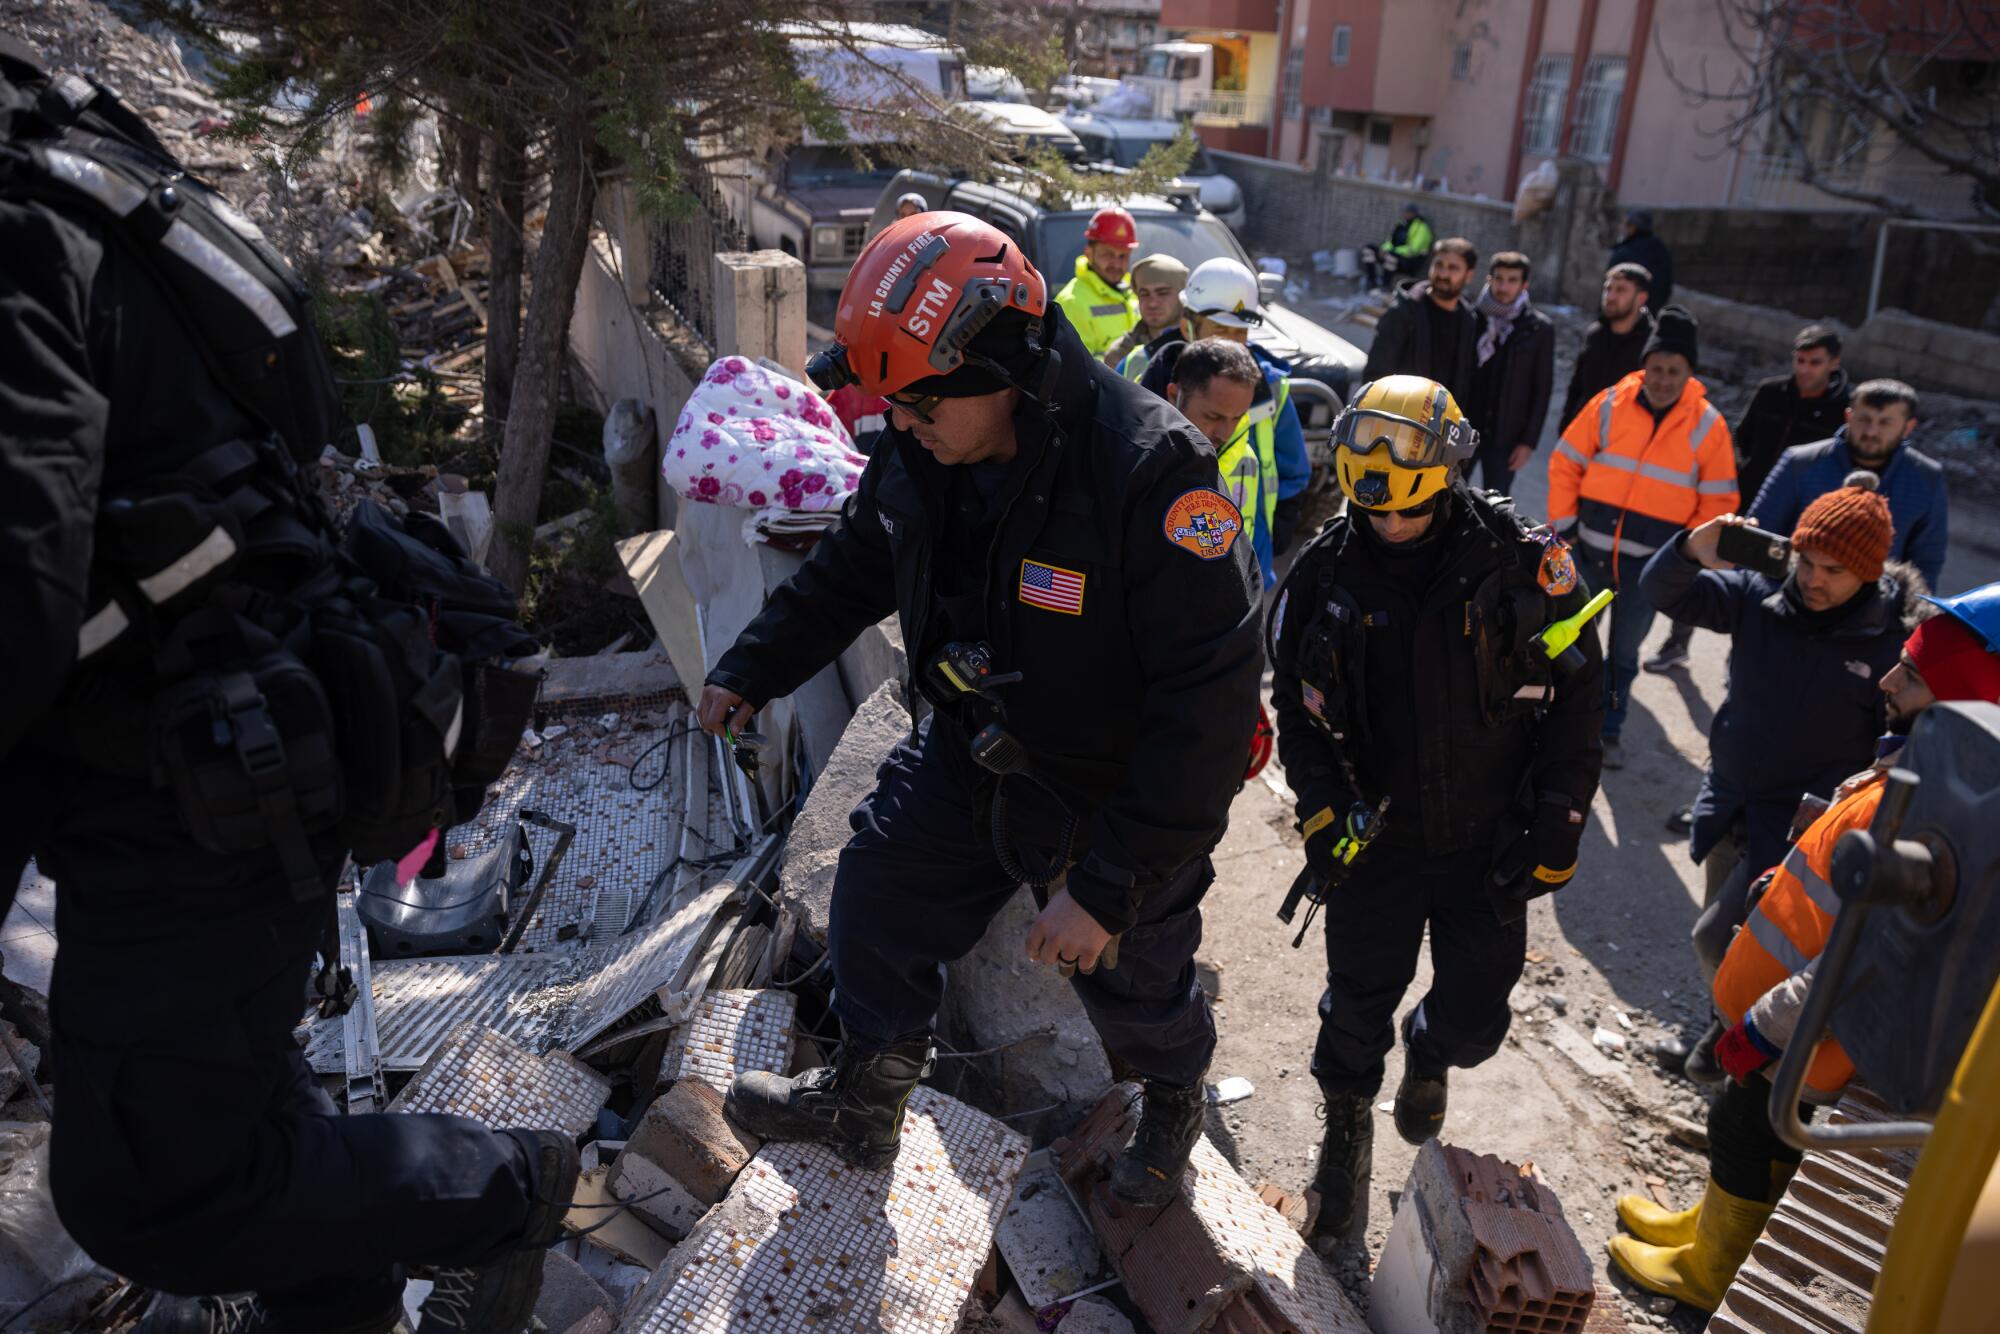 People in hard hats step over rubble amid buildings in the daytime.